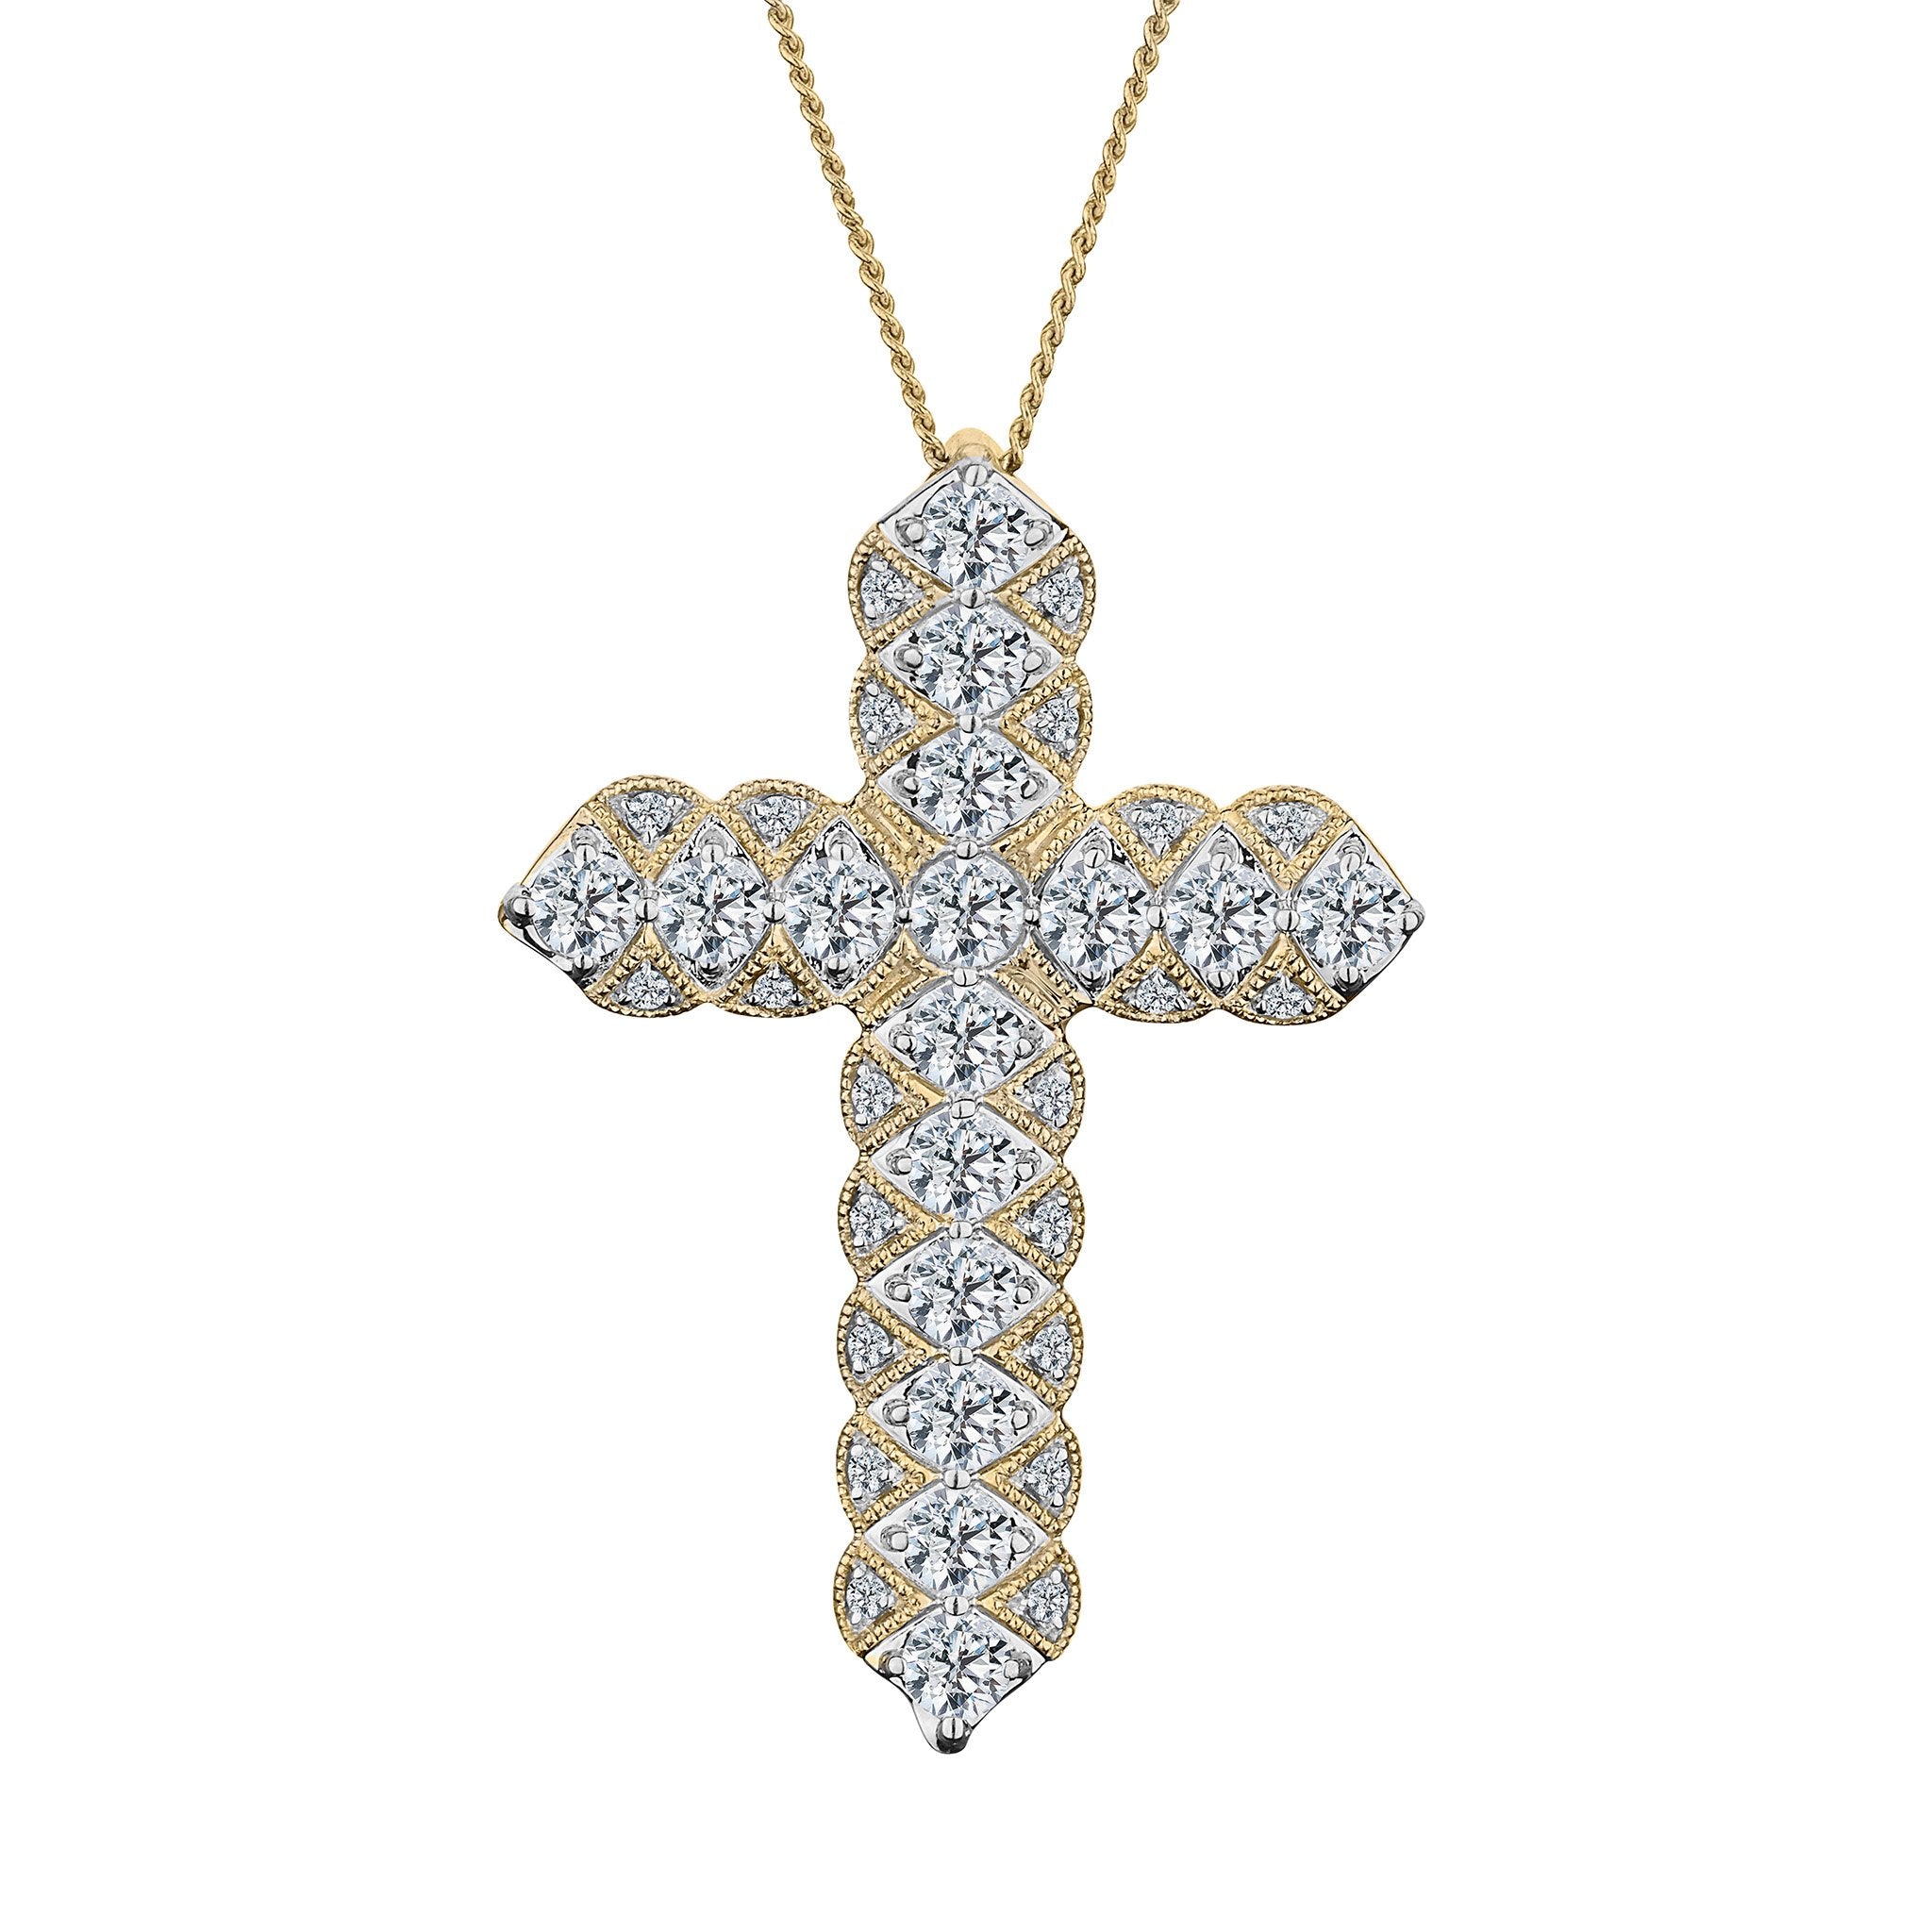 1.00 Carat Diamond Cross Pendant,  10kt Yellow Gold. Necklaces and Pendants. Griffin Jewellery Designs. 